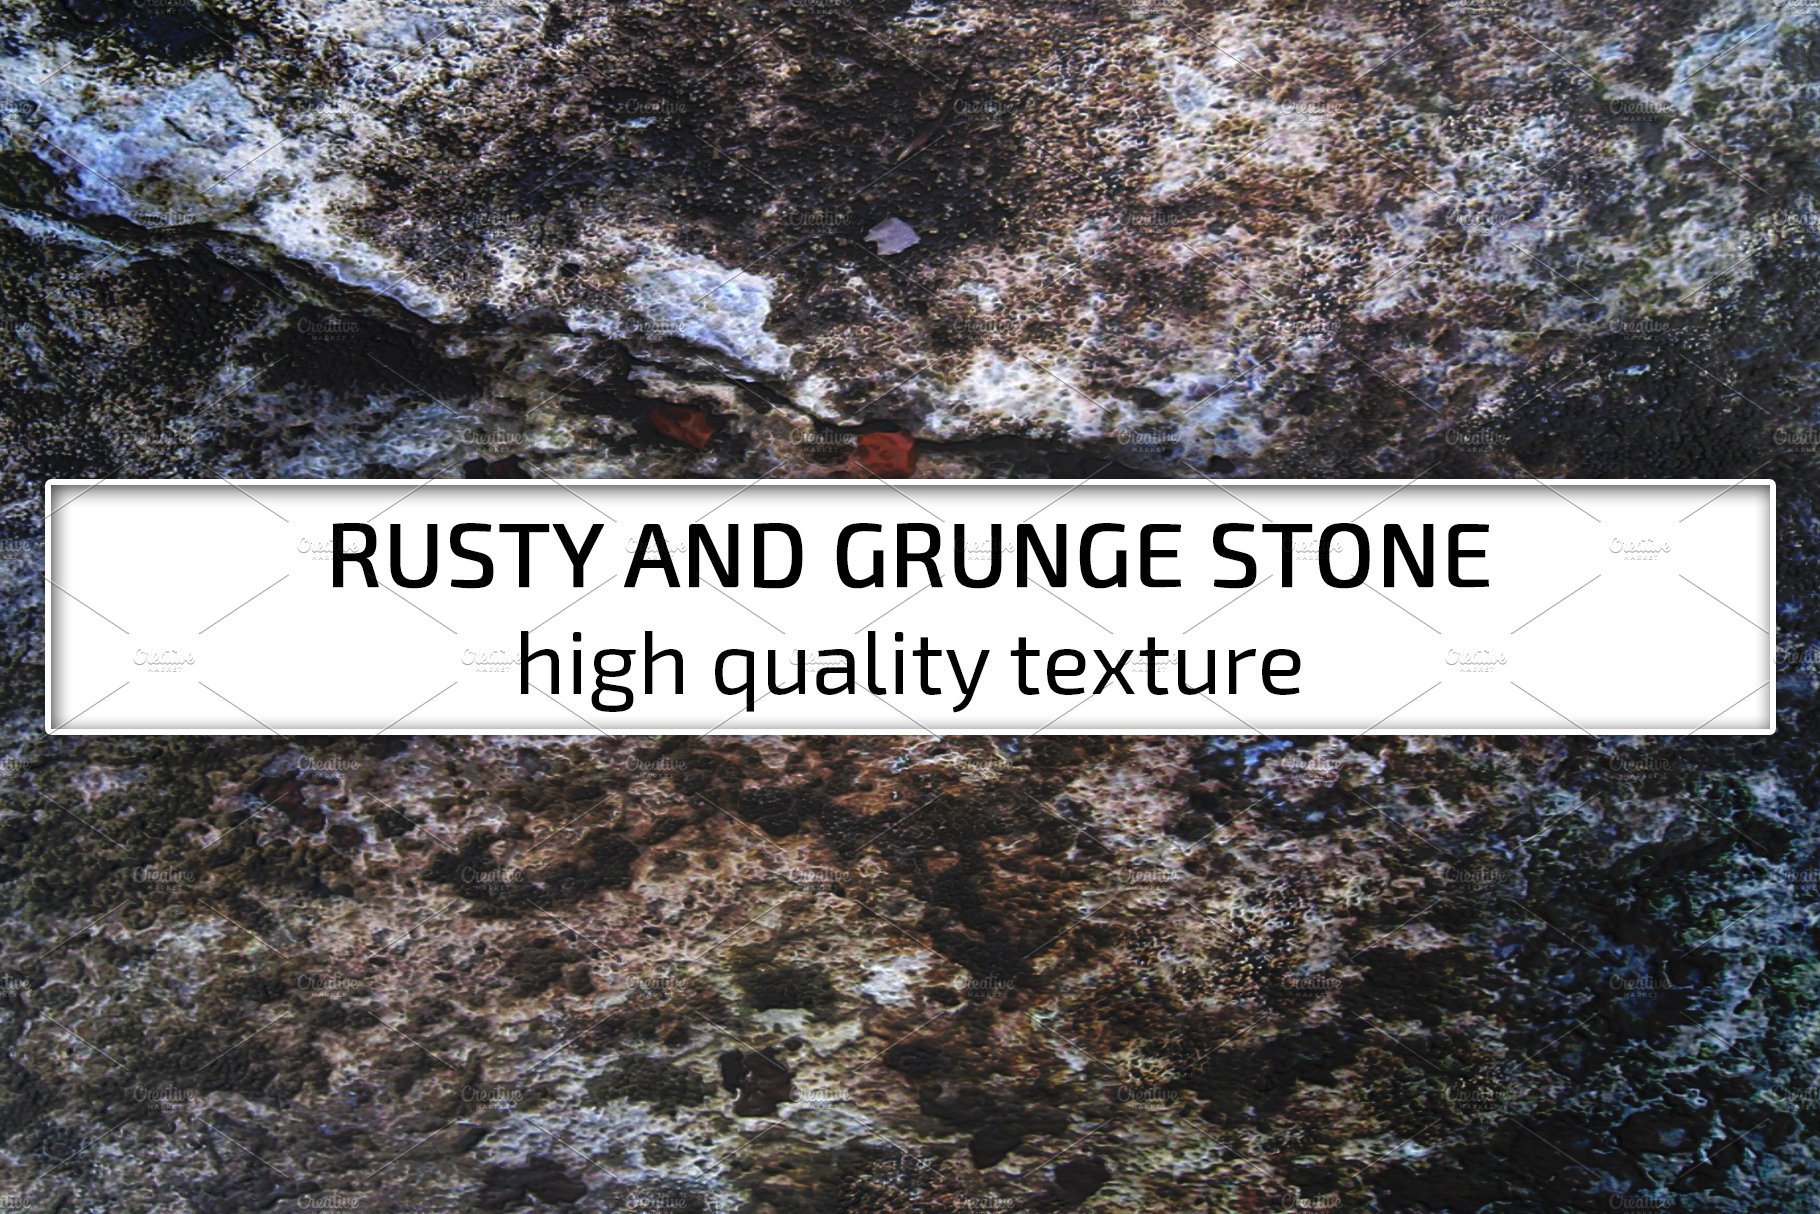 Rusty and Grunge stone cover image.